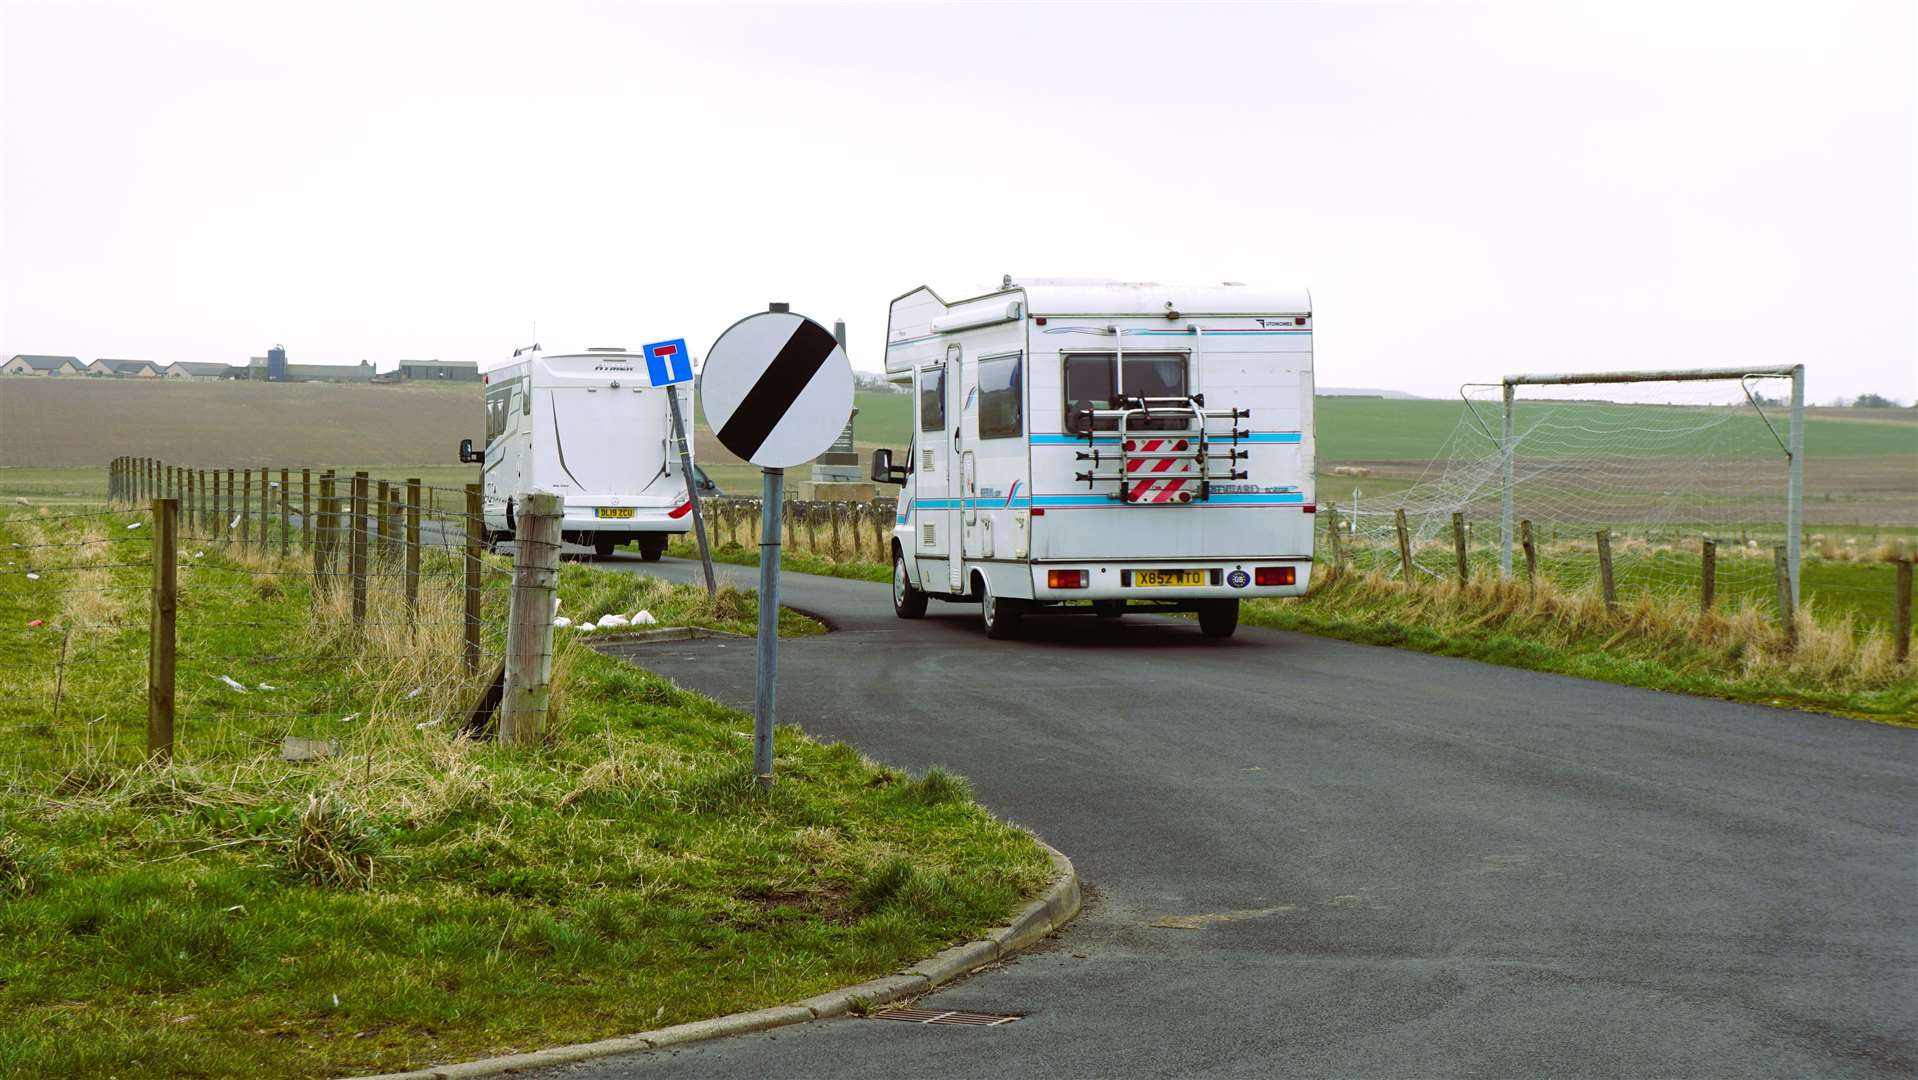 Campervans make their way to Noss Head around the junction. Picture: DGS